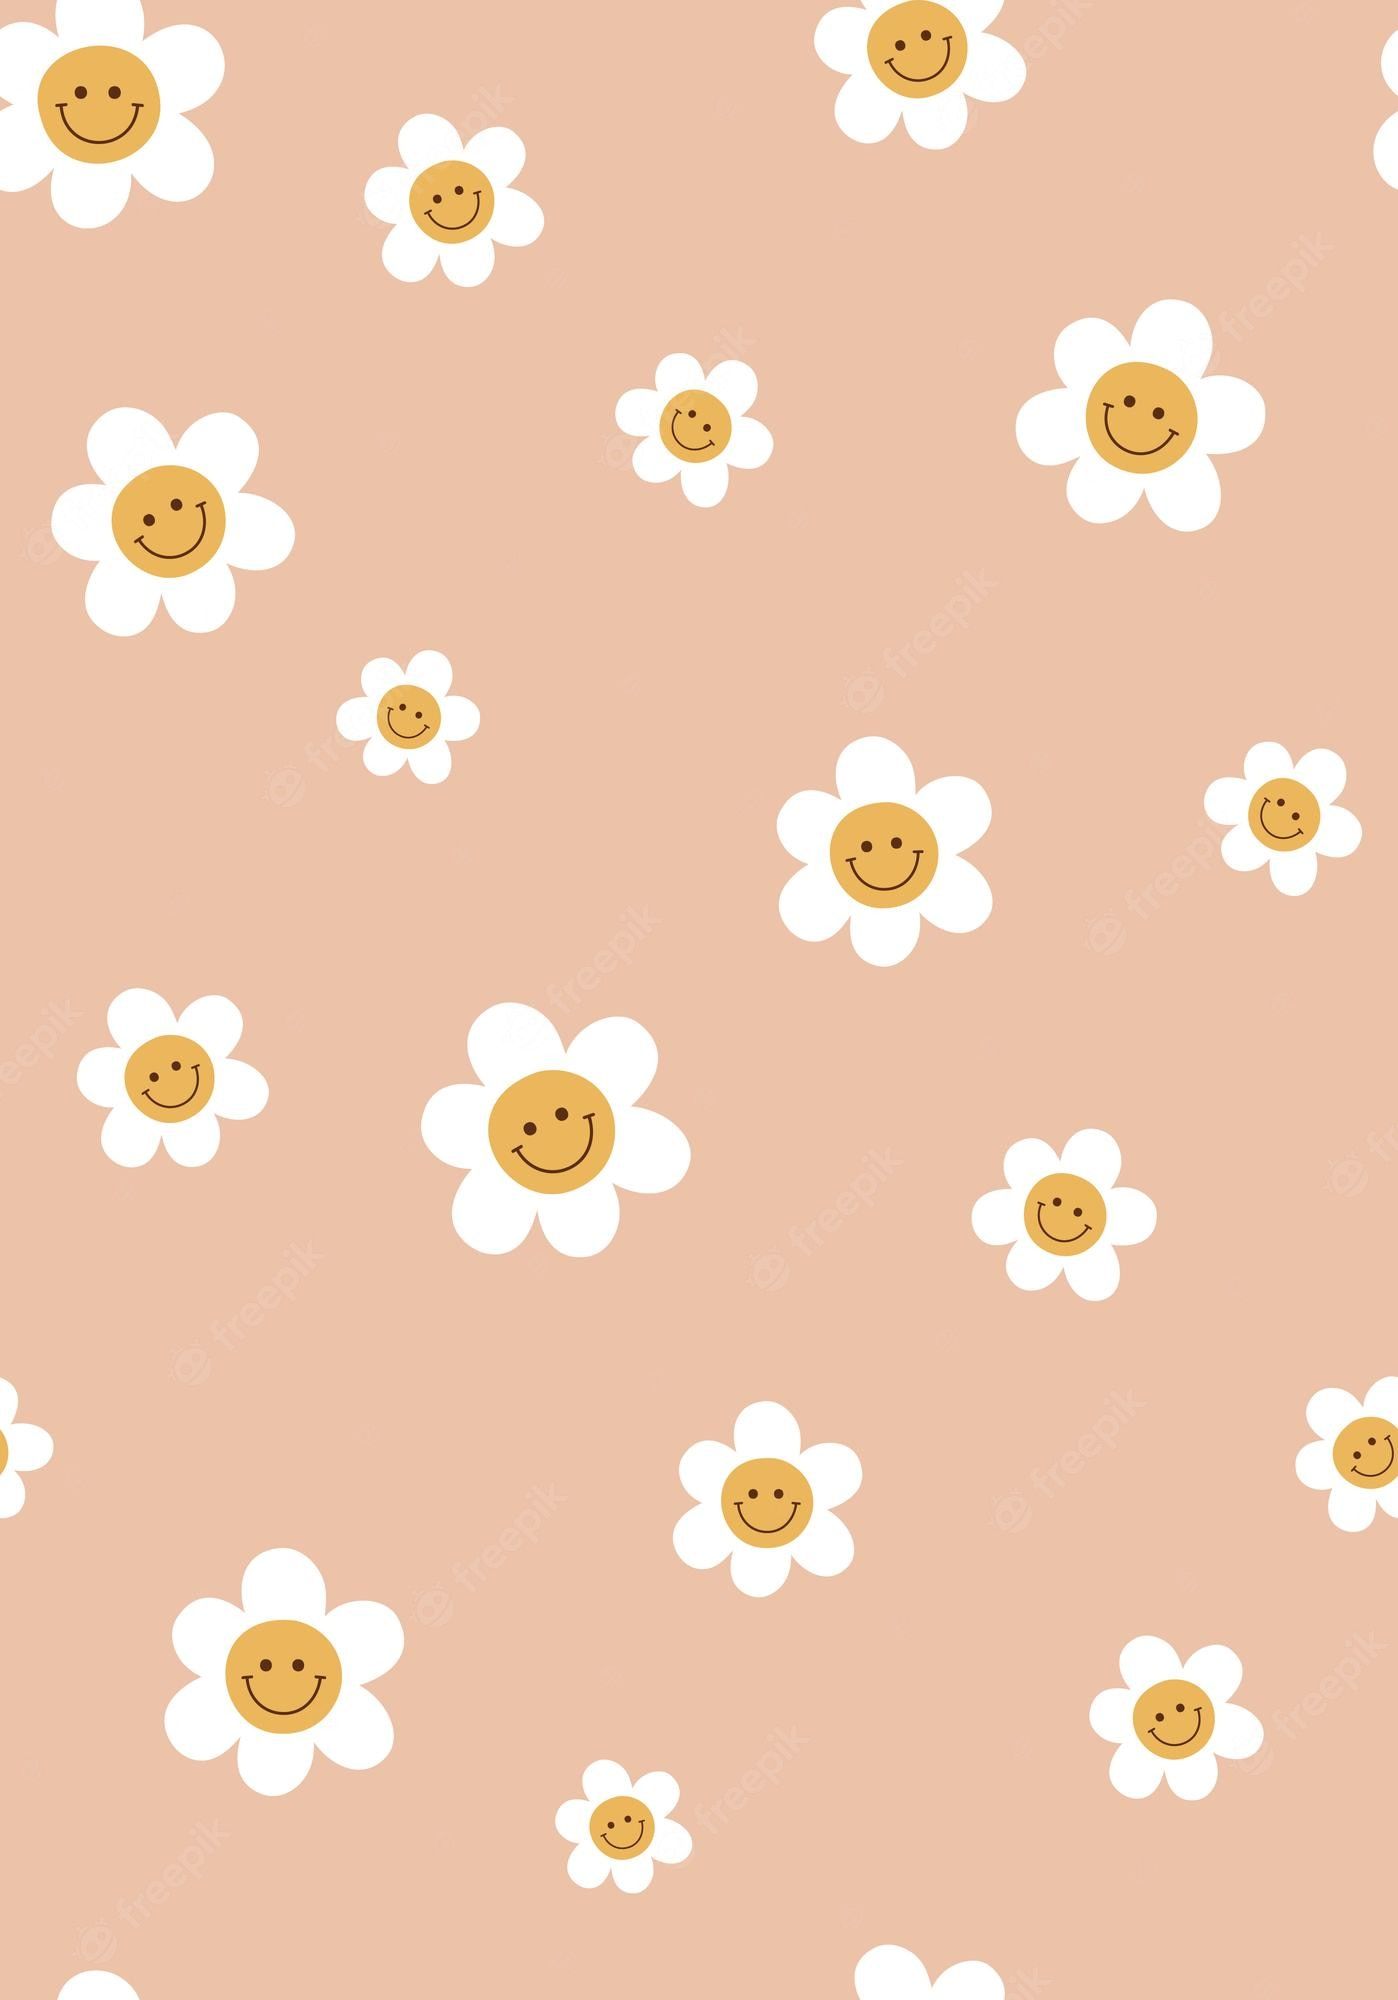 Cute aesthetic wallpaper Vectors & Illustrations for Free Download